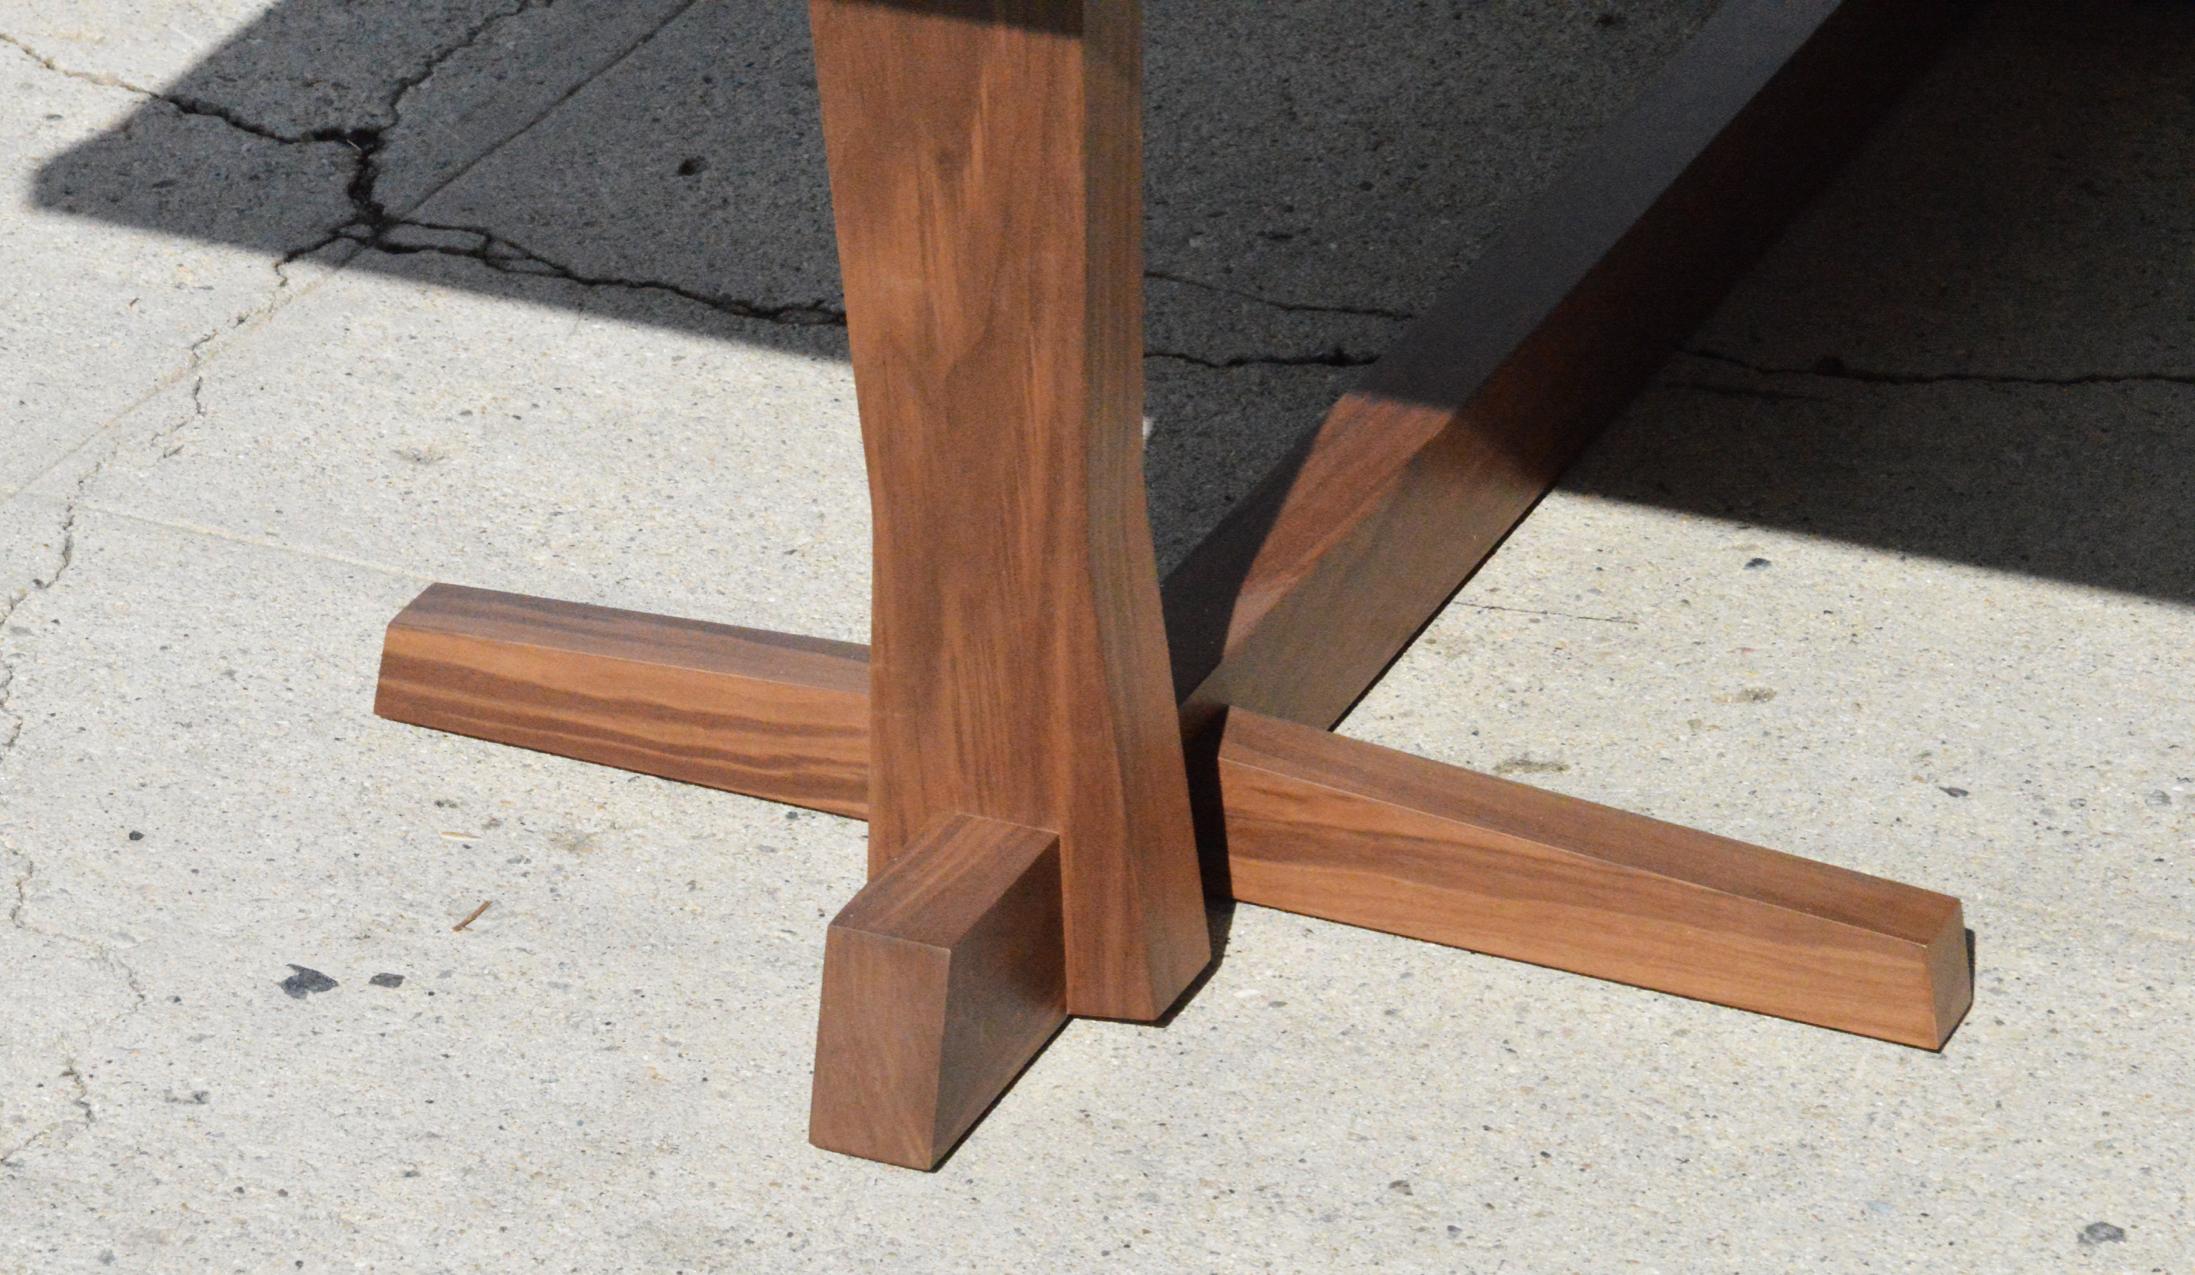 Hand-Crafted Custom Walnut Slab Live Edge Dining Table For Sale